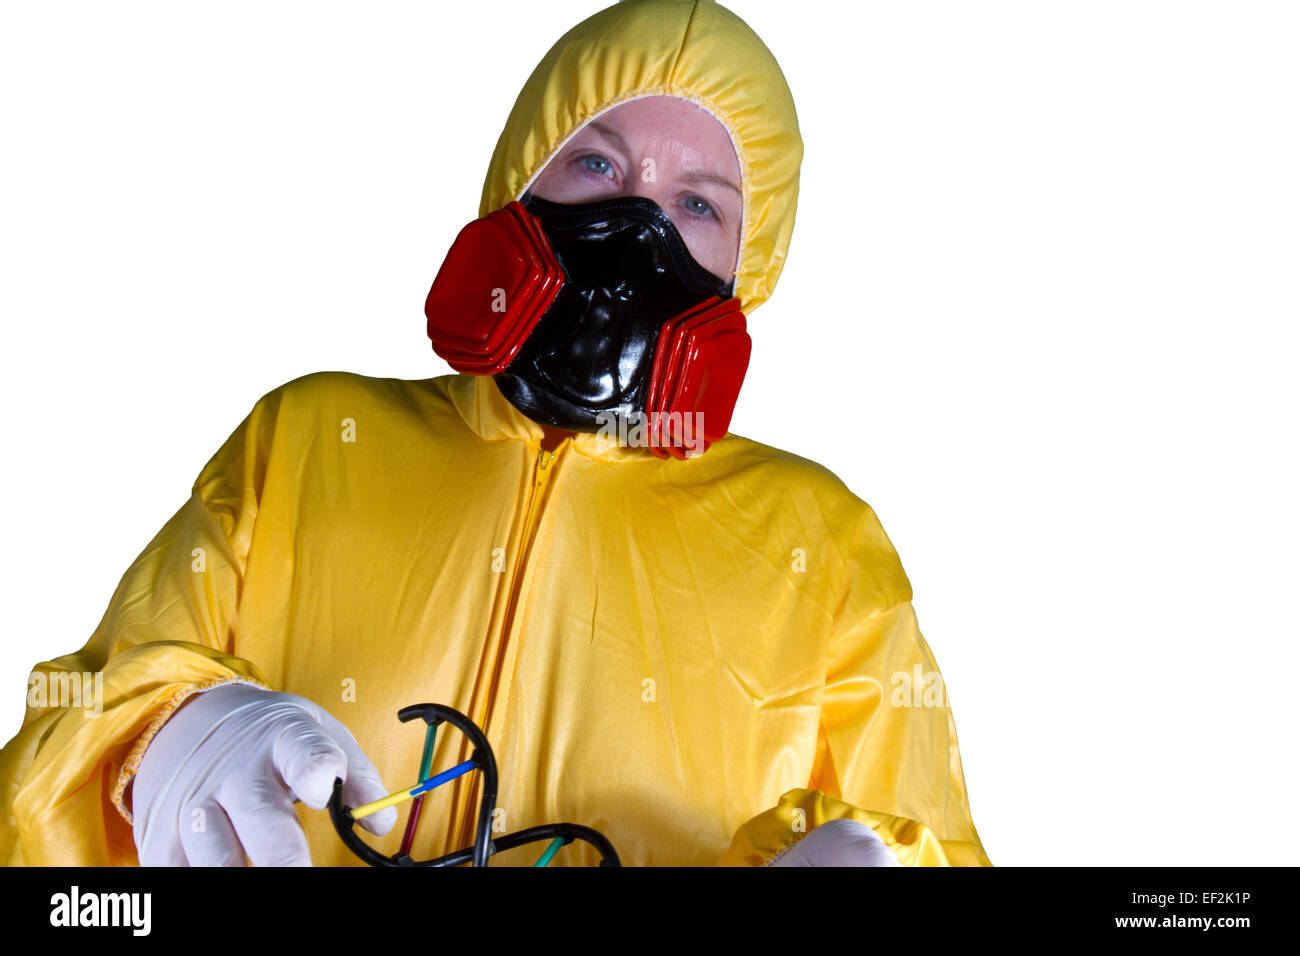 Woman dressed in HazMat suit with gas mask and shield Stock Photo